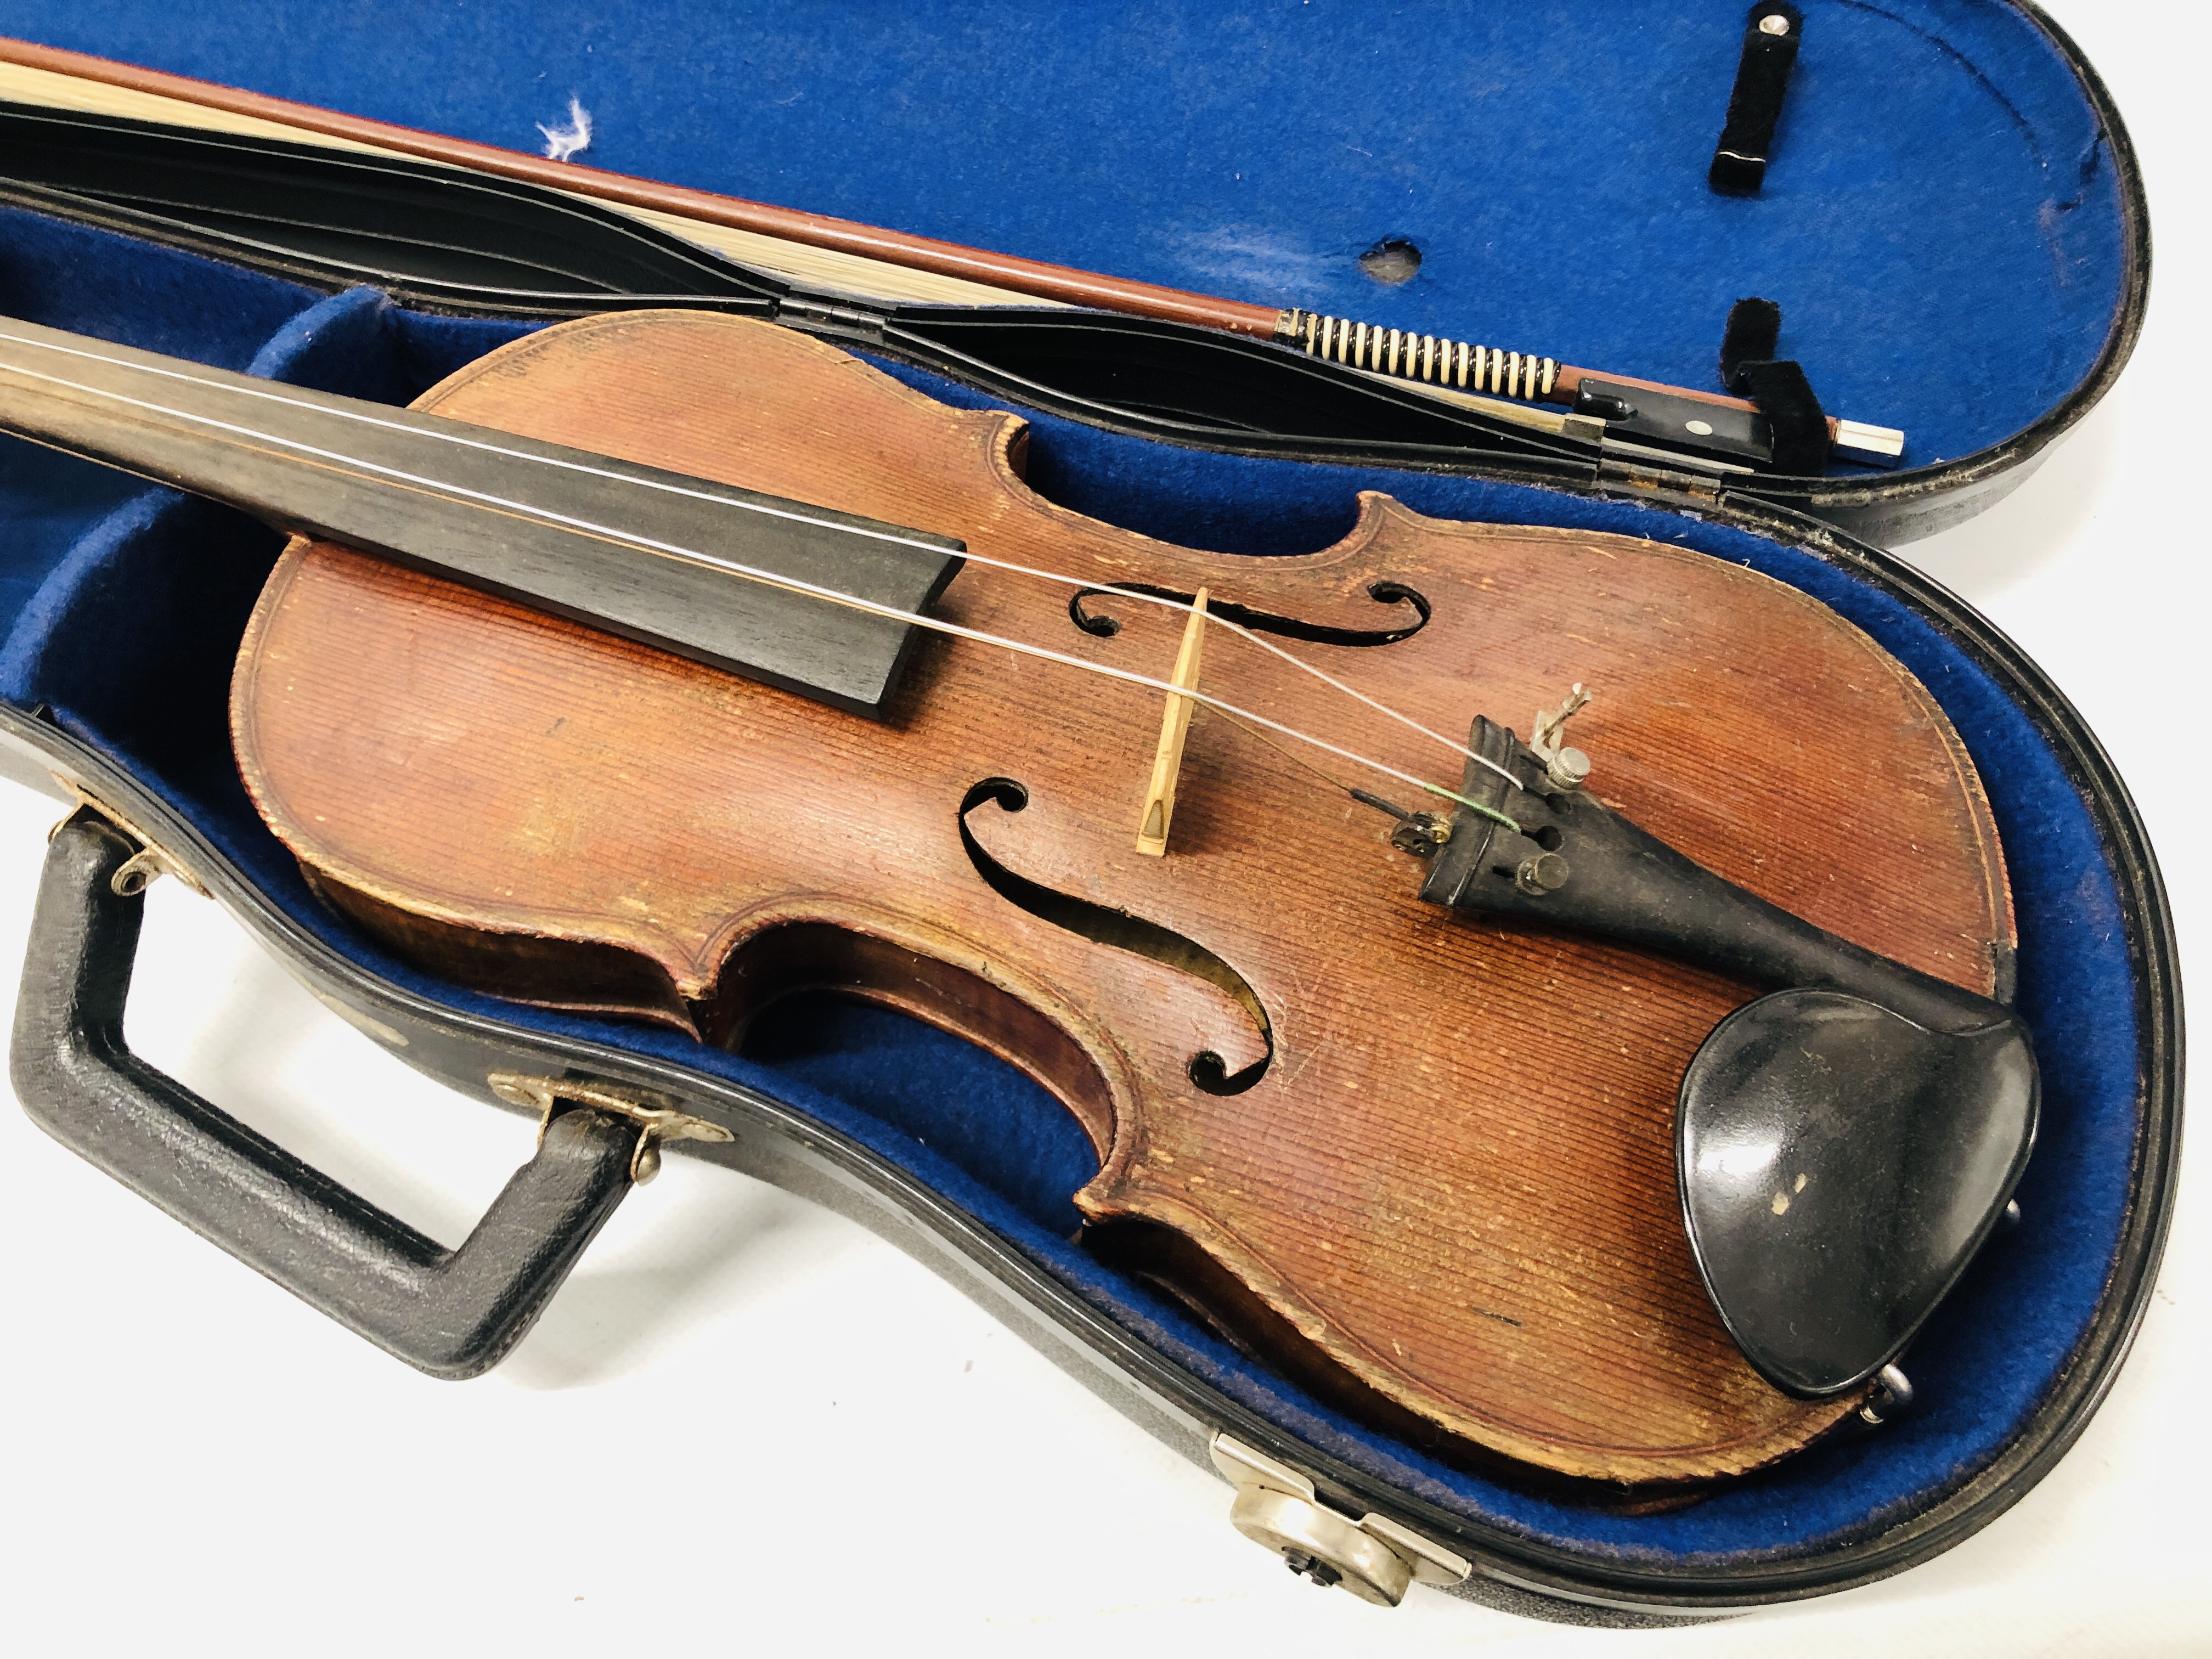 TWO VINTAGE VIOLINS IN FITTED HARD CASES - Image 2 of 11